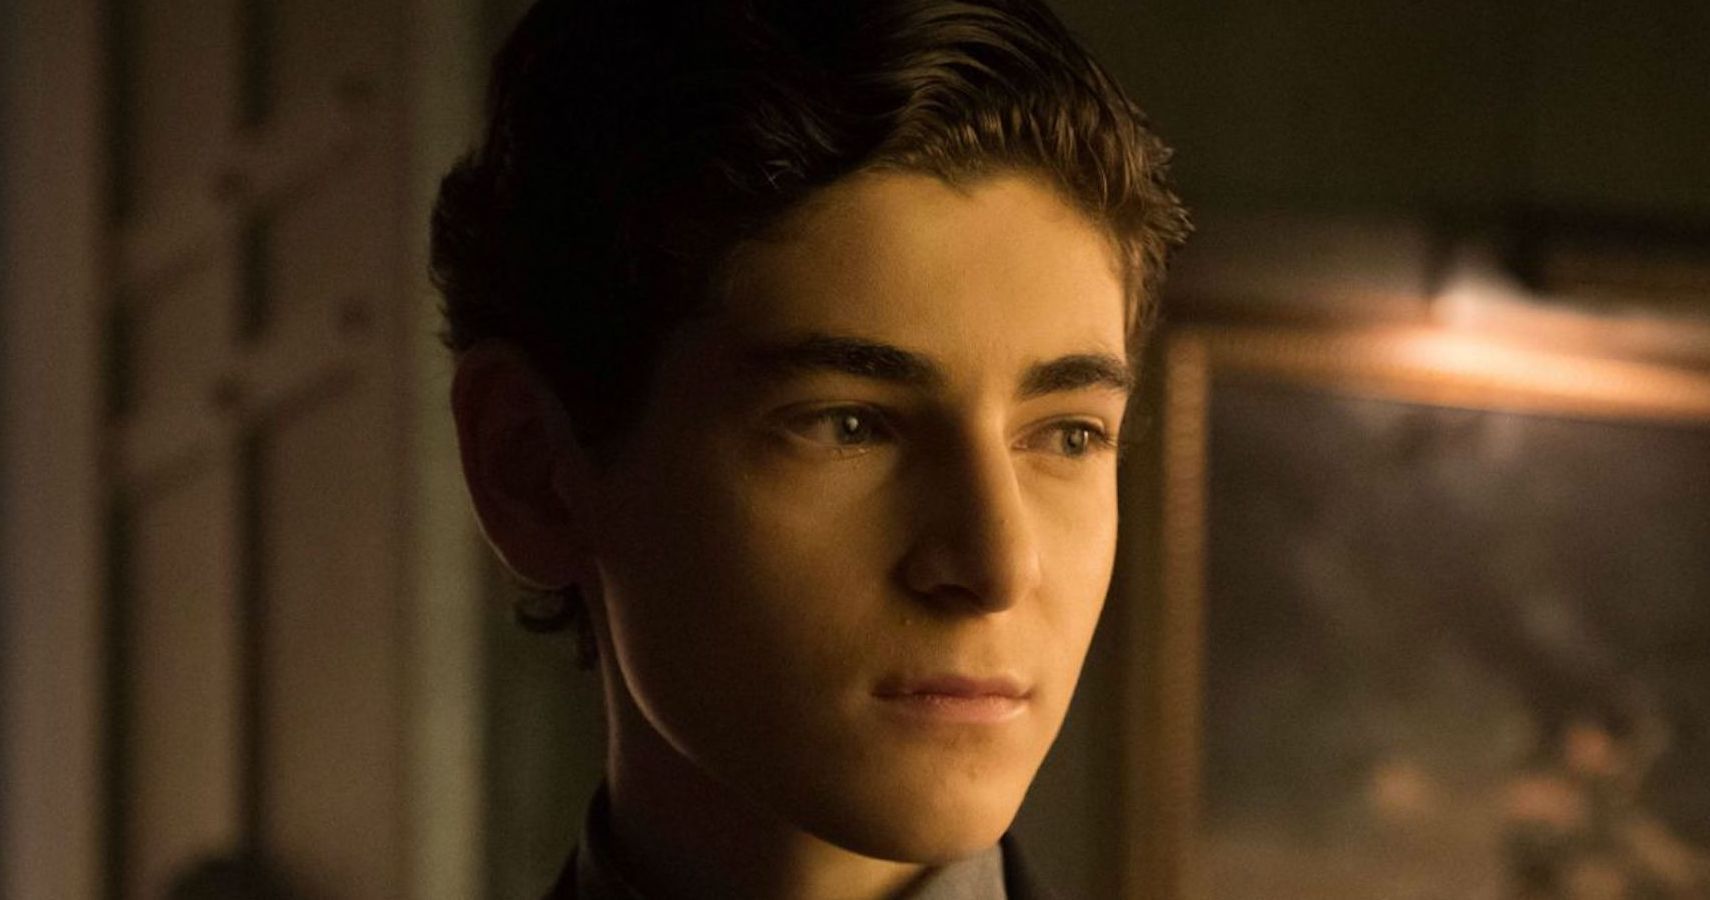 Exclusive: 'Gotham' Star David Mazouz Talks About What It’s Like To Act ...